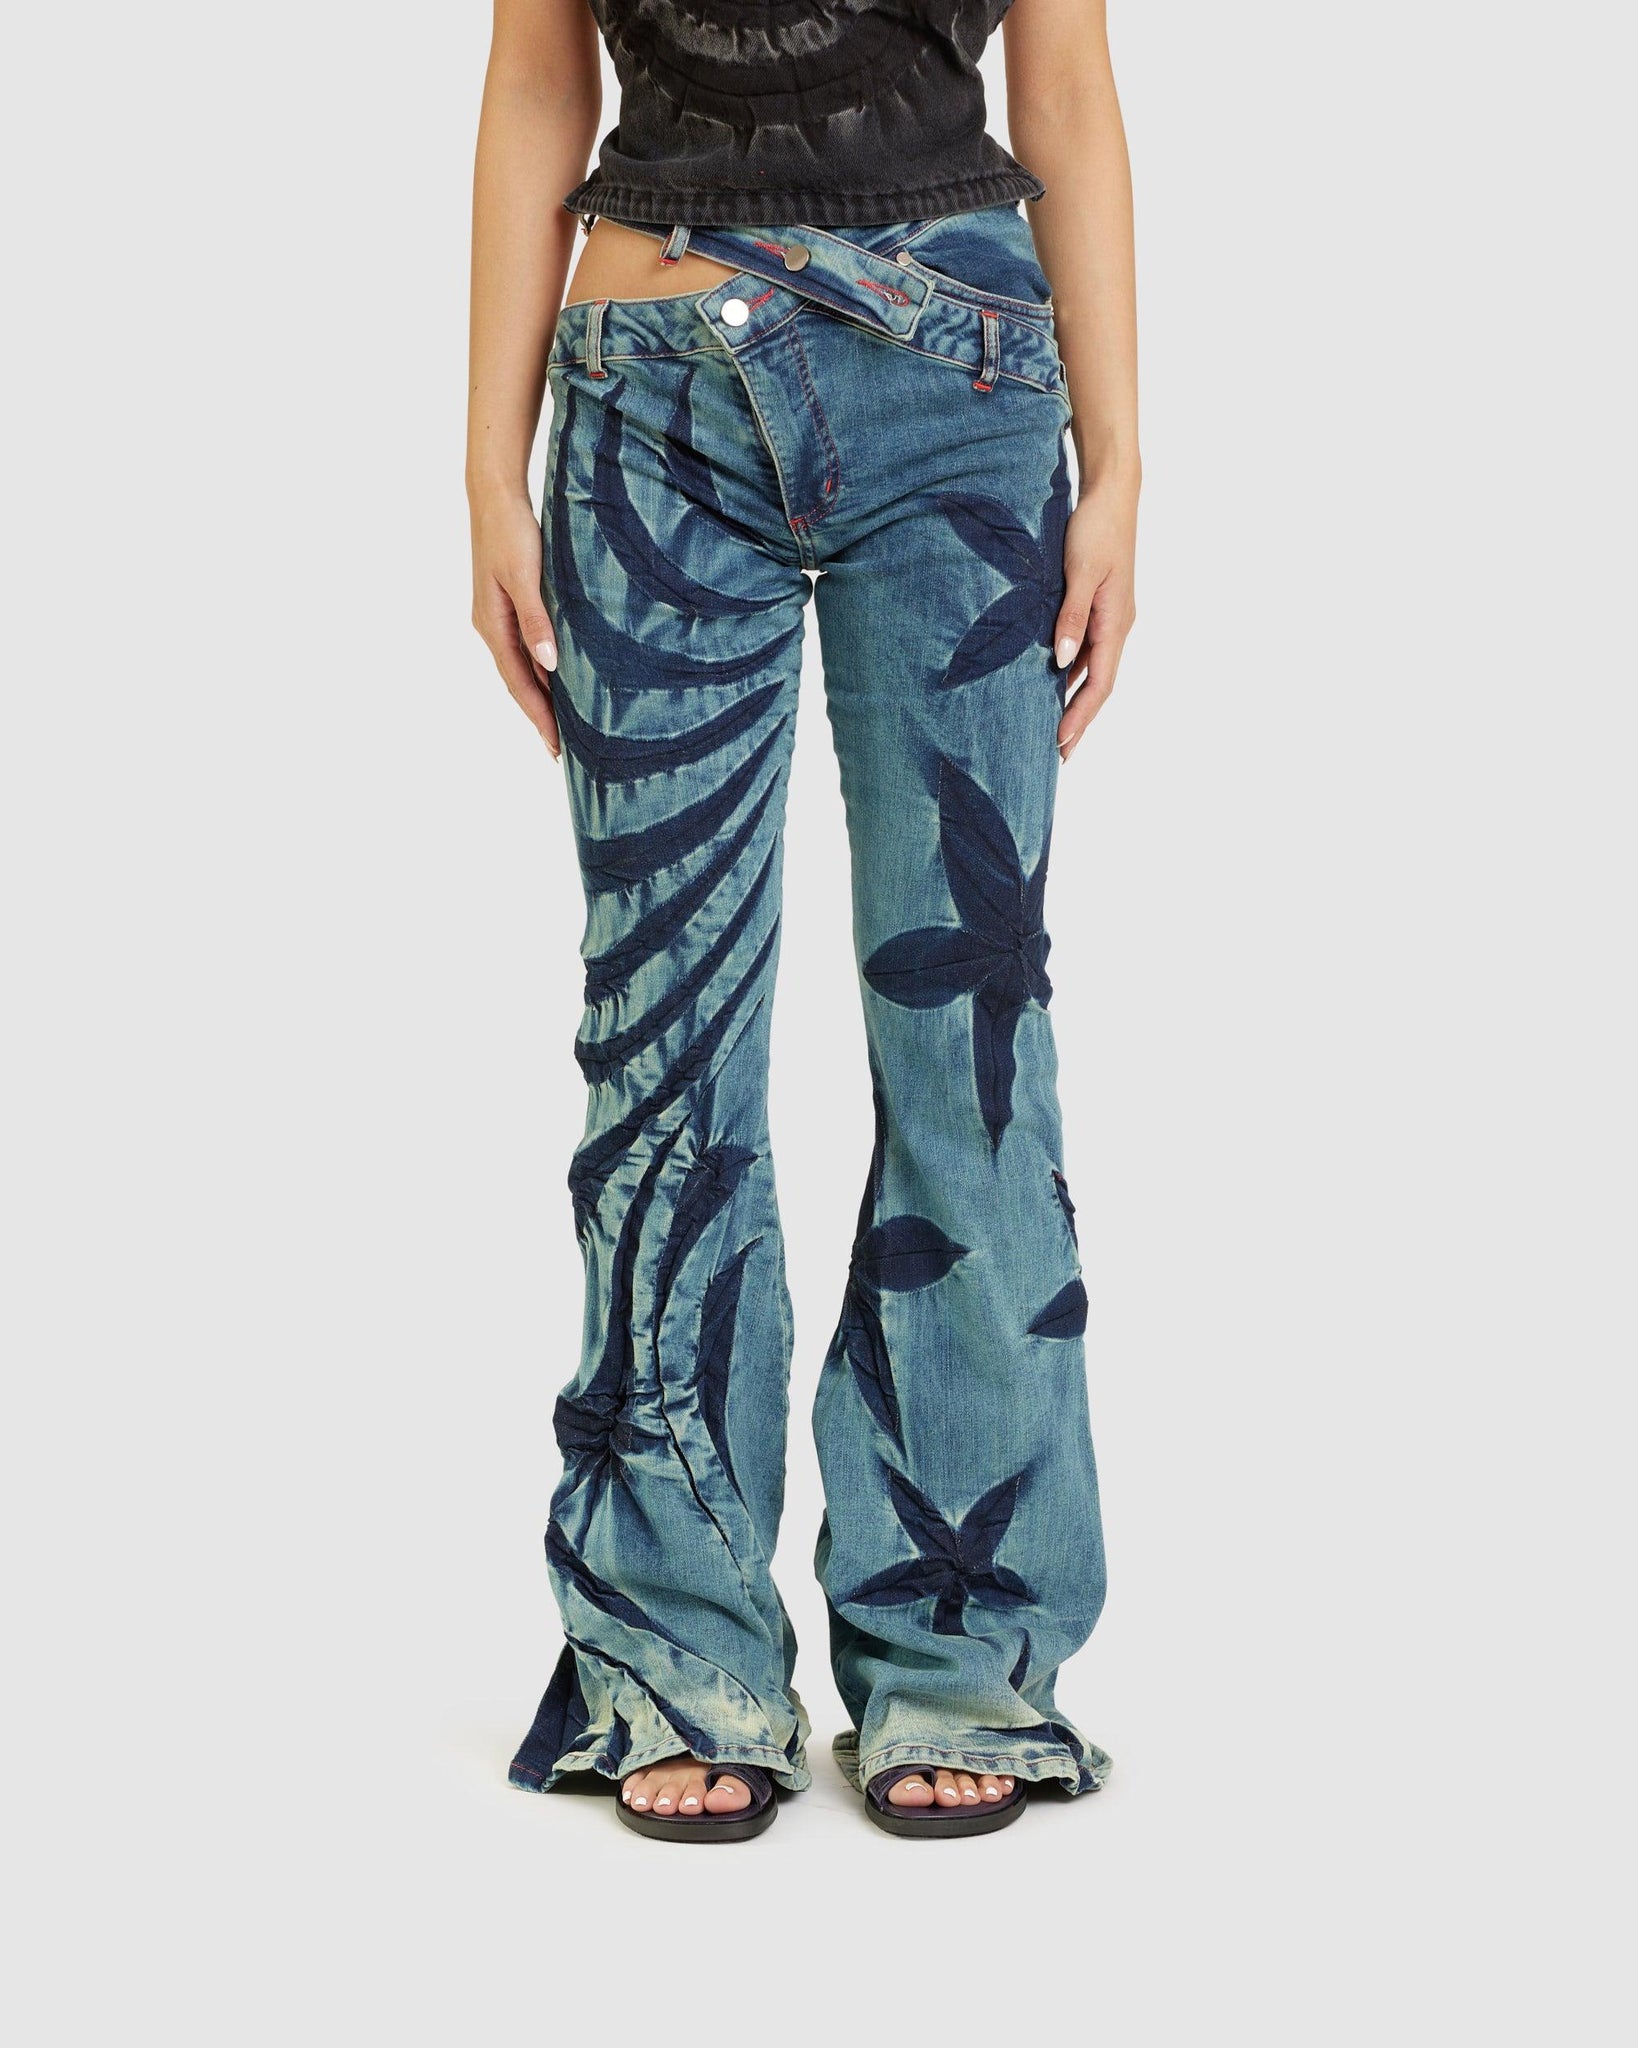 50/50 Flower Bias Cut Fade Jeans - {{ collection.title }} - Chinatown Country Club 